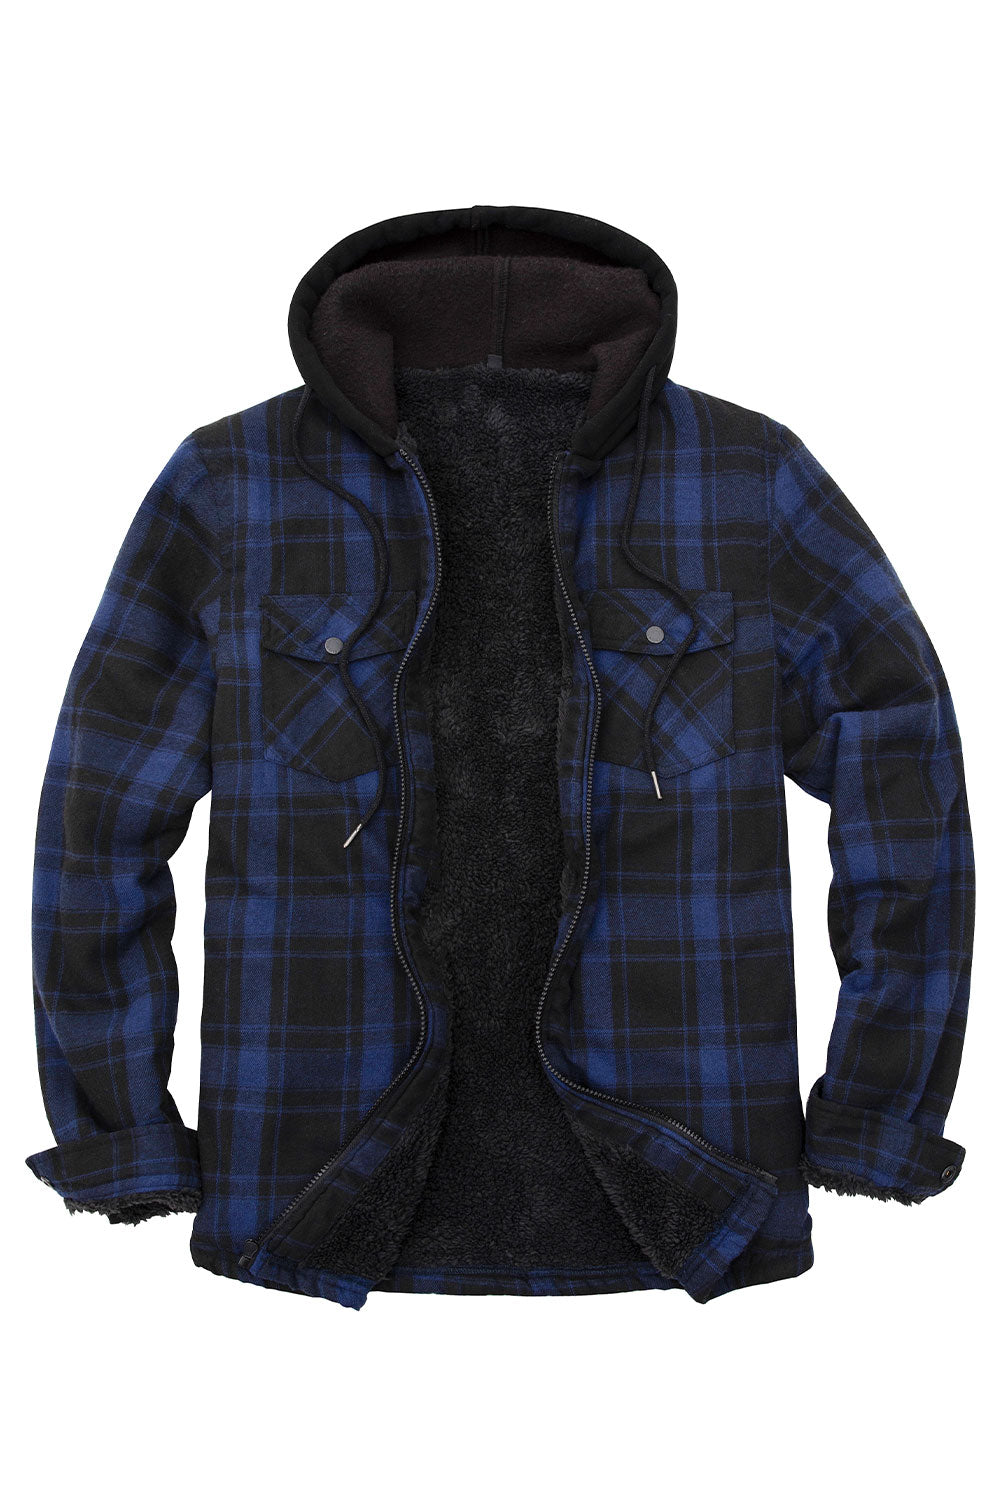 Men's Sherpa Lined Full Zip Up Plaid Flannel Hooded Jacket